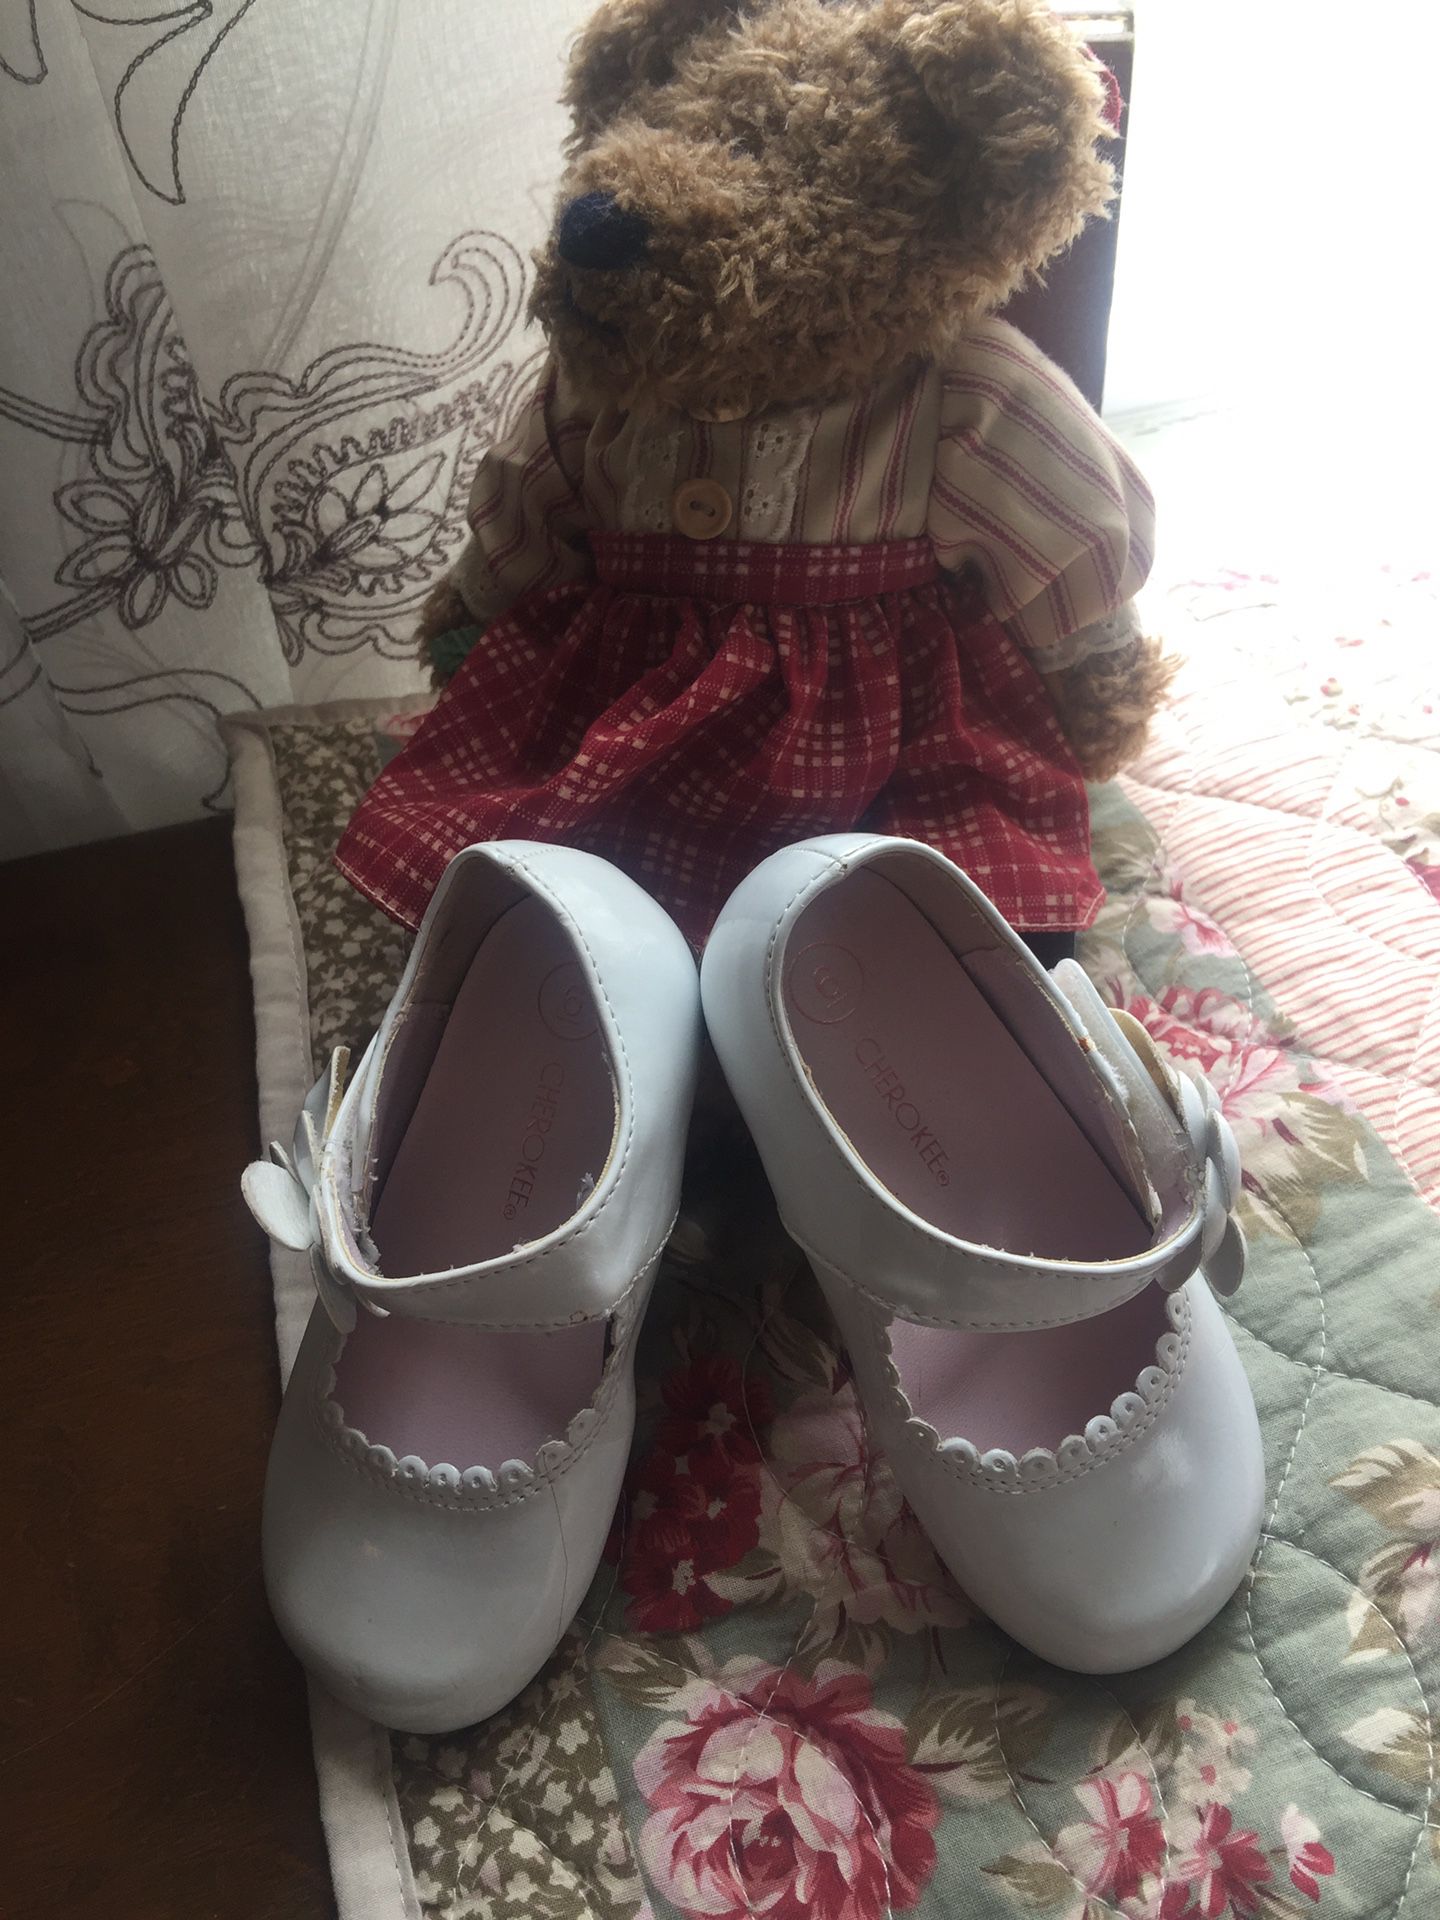 Little girls white patent 🌺🐥leather Mary Jane shoes euc great 🐥🌸 for Easter !!check my other little girls shoes clothes stuffed animals also 🌸🌺misses